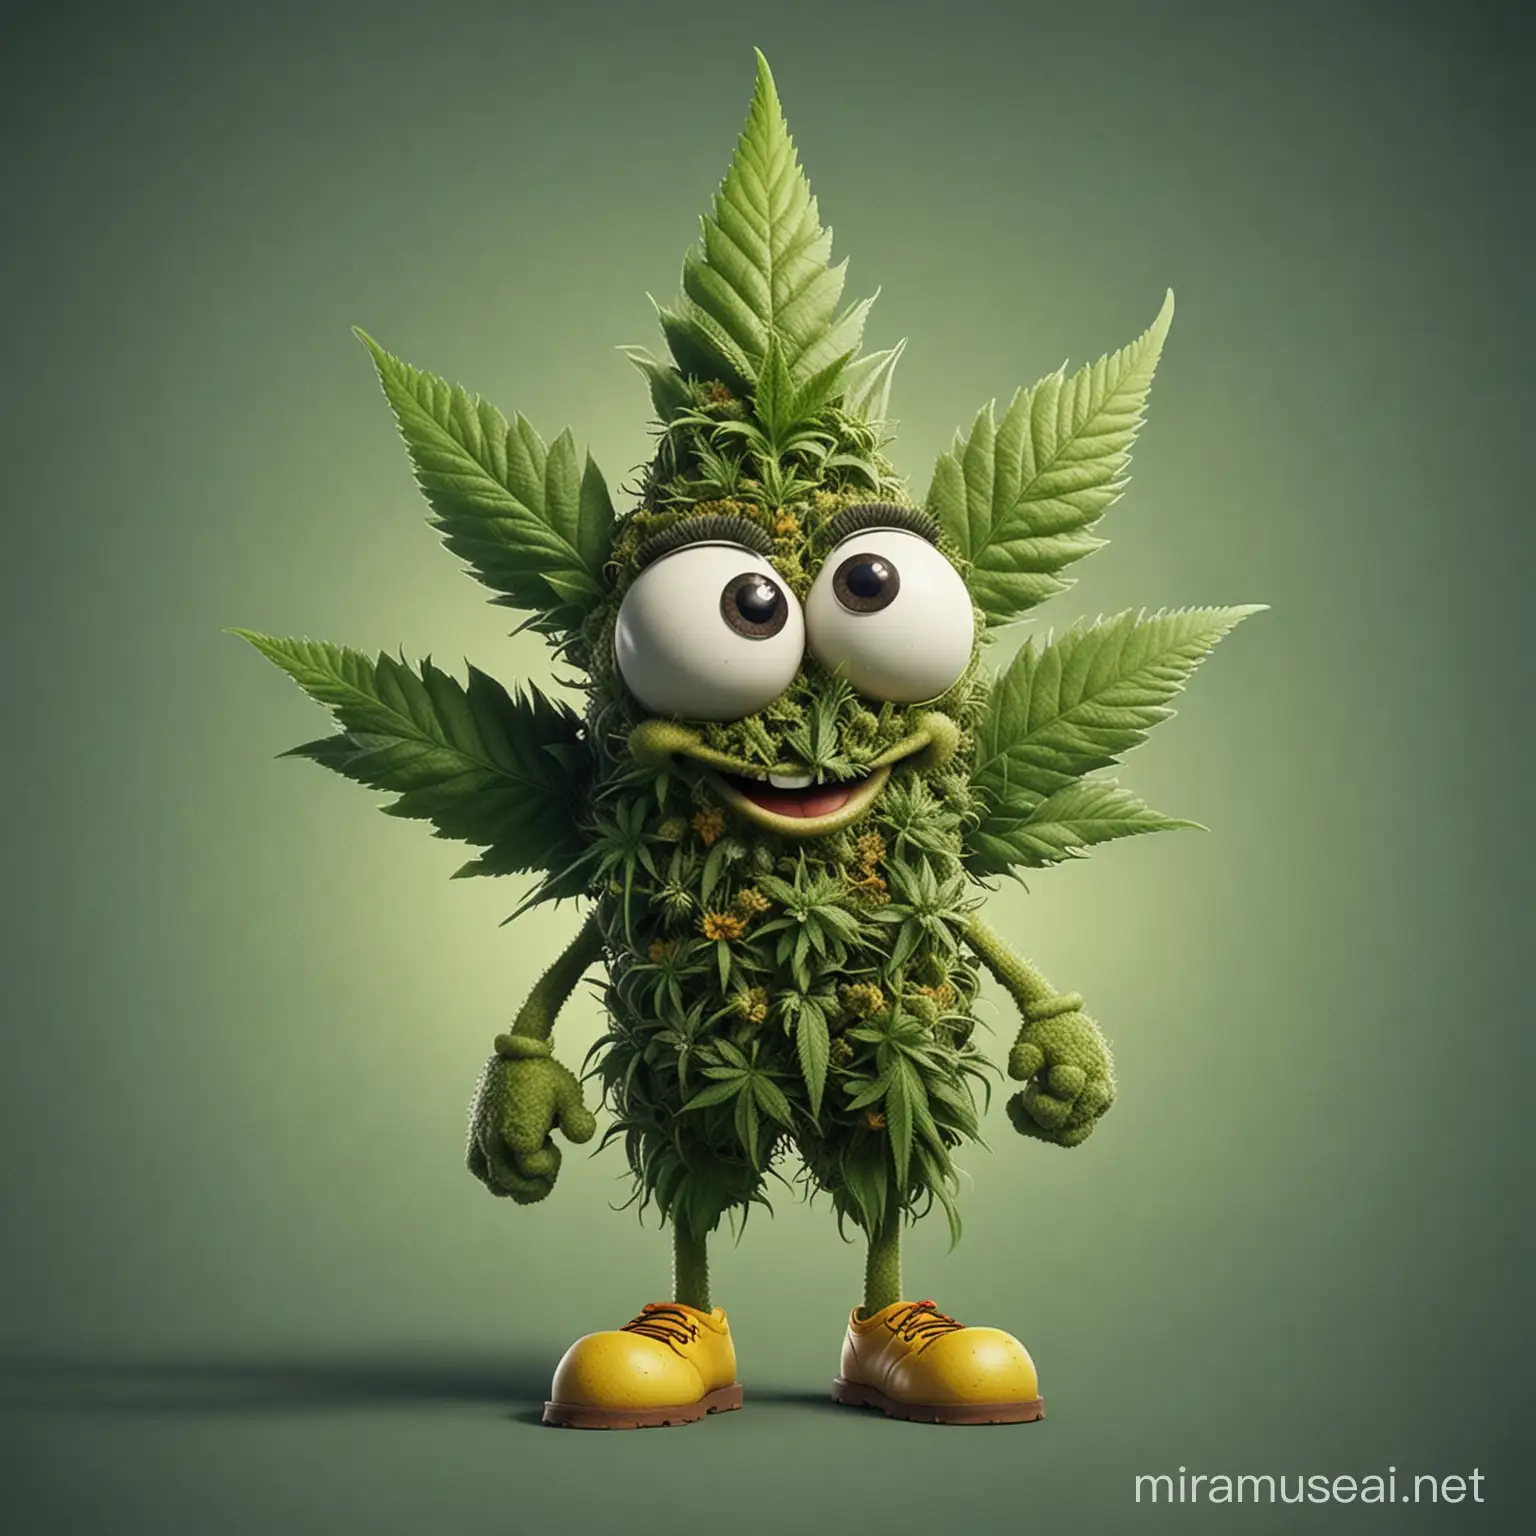 Cannabis leaf cartoon hero, like a sponge Bob or Mickey Mouse, but the much cutest and with a human silhouette body, with legs and arms. Cannabis leaf cartoon hero created from the Cannabis flower buds and has hashish eyes on his face and he is always smiling.
